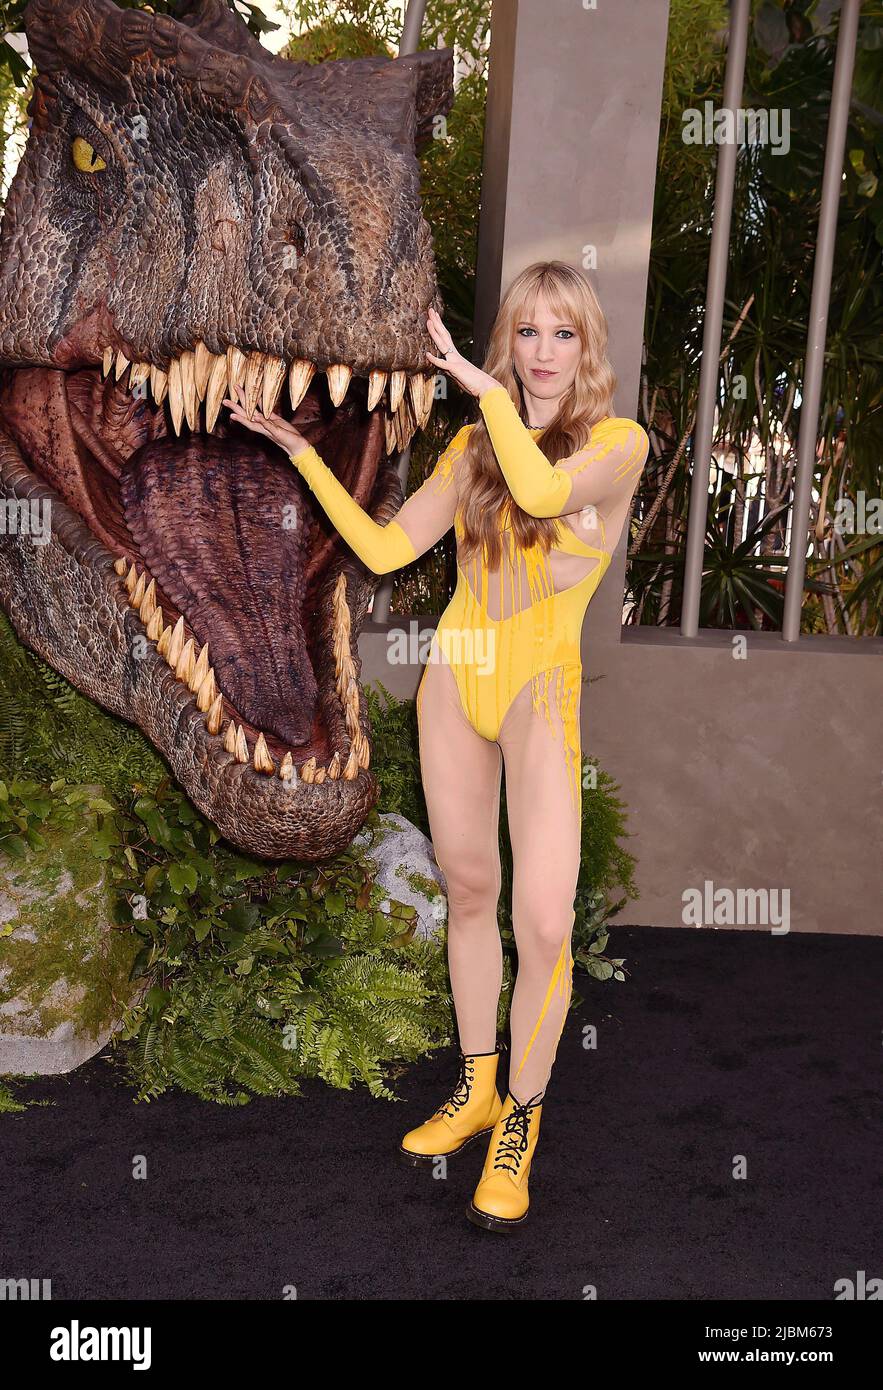 Hollywood, Ca. 06th June, 2022. Emily Carmichael attends the Los Angeles premiere of Universal Pictures' 'Jurassic World Dominion' at the TCL Chinese Theatre on June 06, 2022 in Hollywood, California. Credit: Jeffrey Mayer/Jtm Photos/Media Punch/Alamy Live News Stock Photo